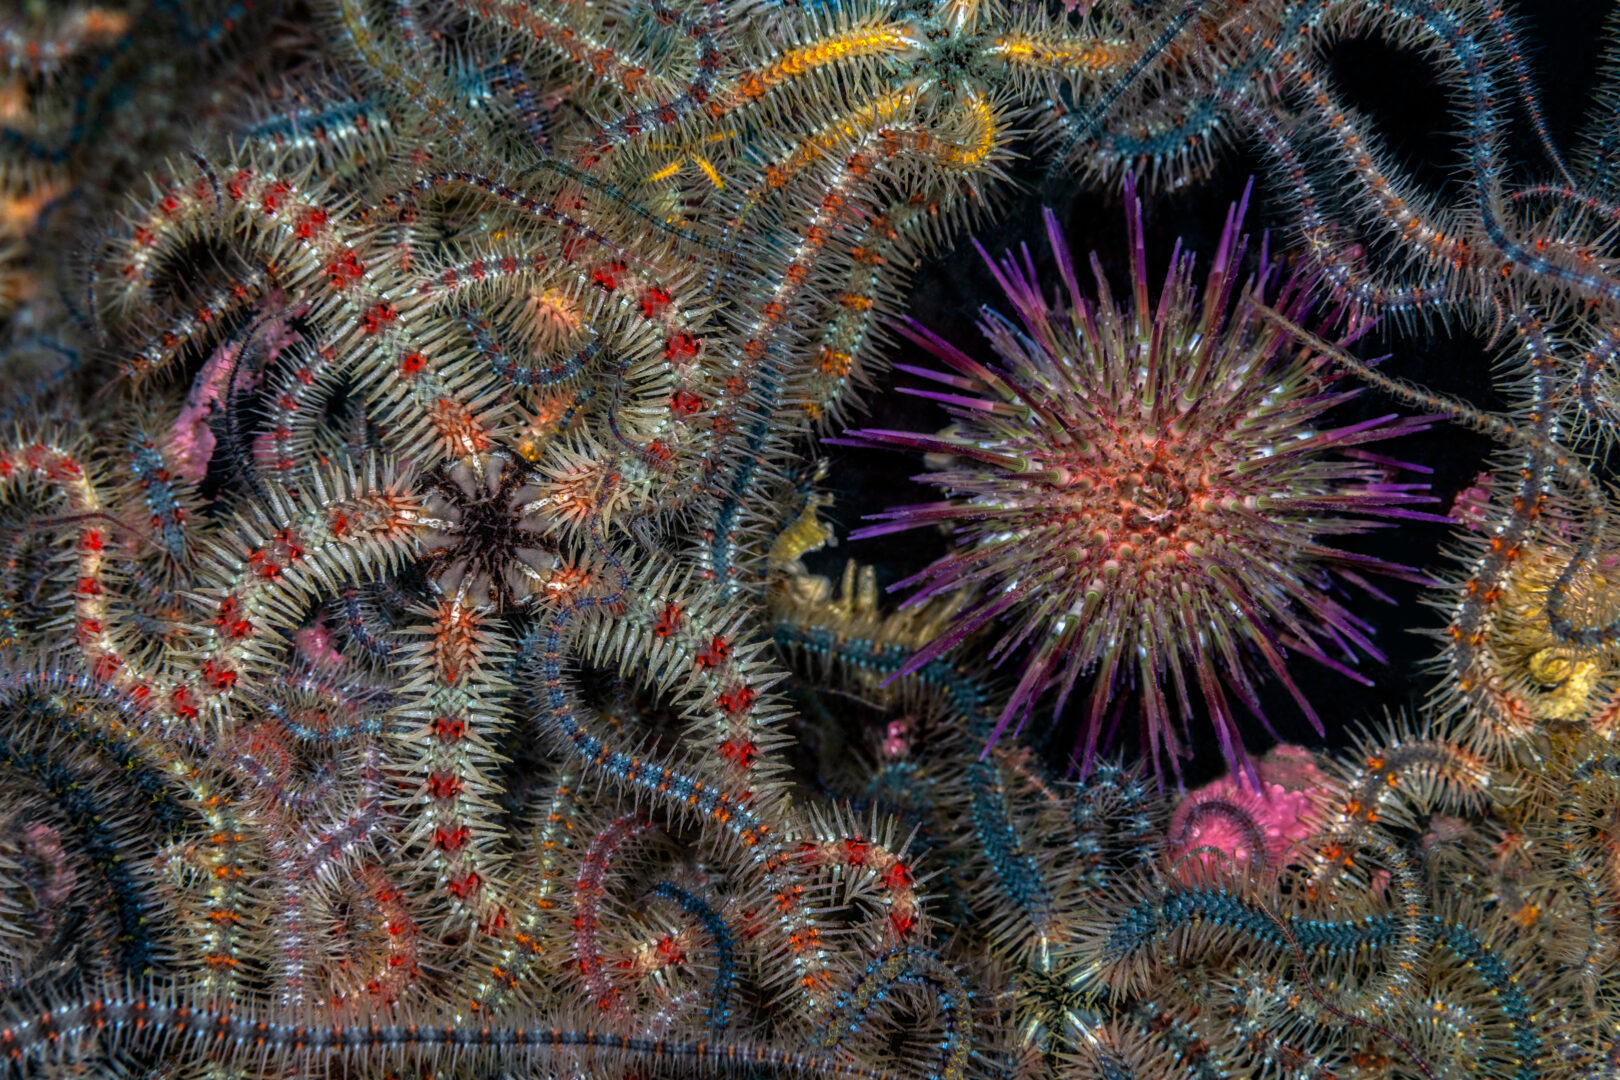 a colourful brittlestar and purple urchin sit side by side back dropped by other brittlestar arms and blackness